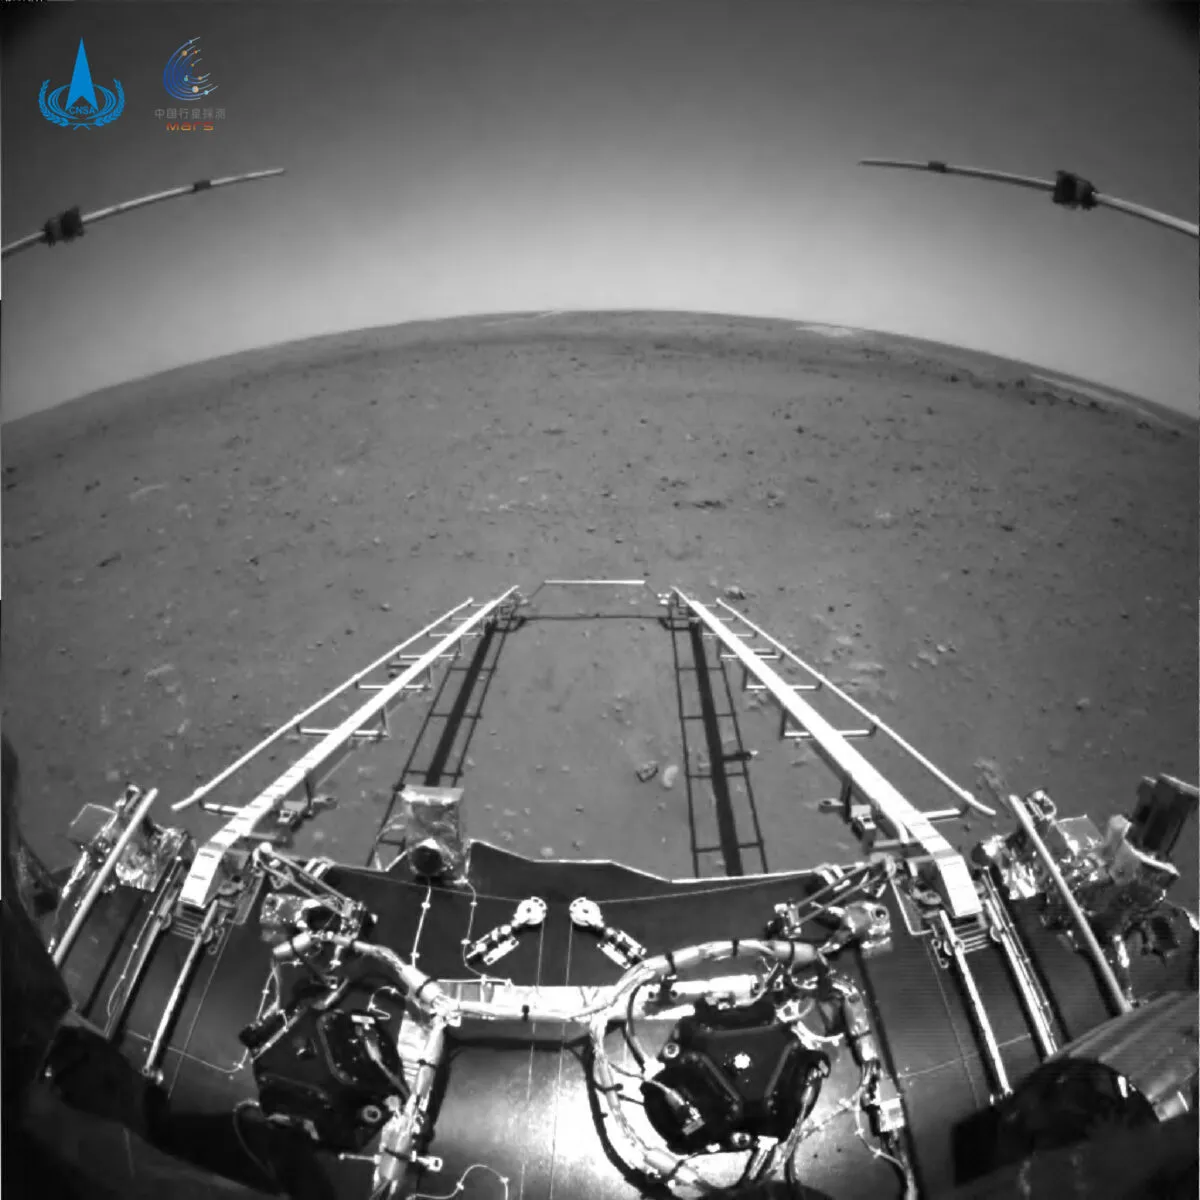 A view of Mars captured by China's Tianwen-1 rover's 'obstacle avoidance camera'. Credit: CNSA